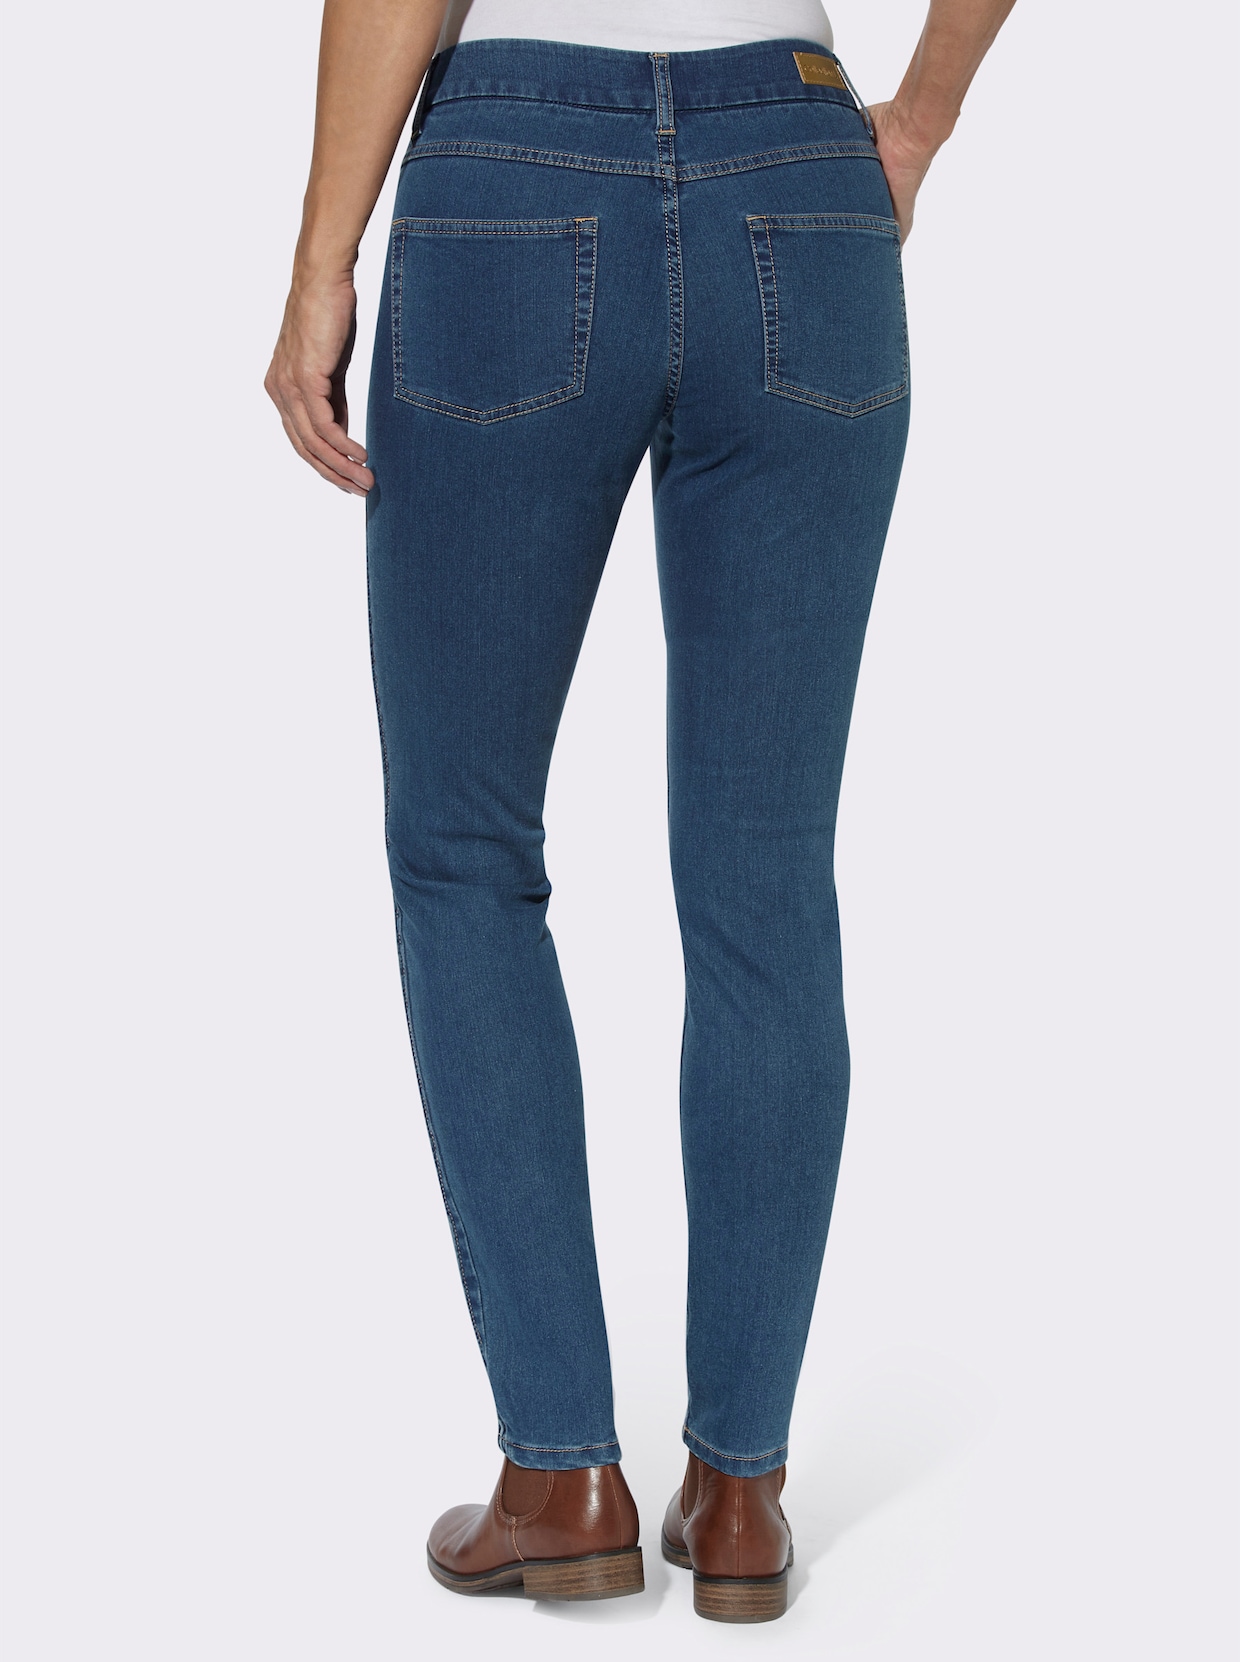 Thermojeans - blue-stonewashed